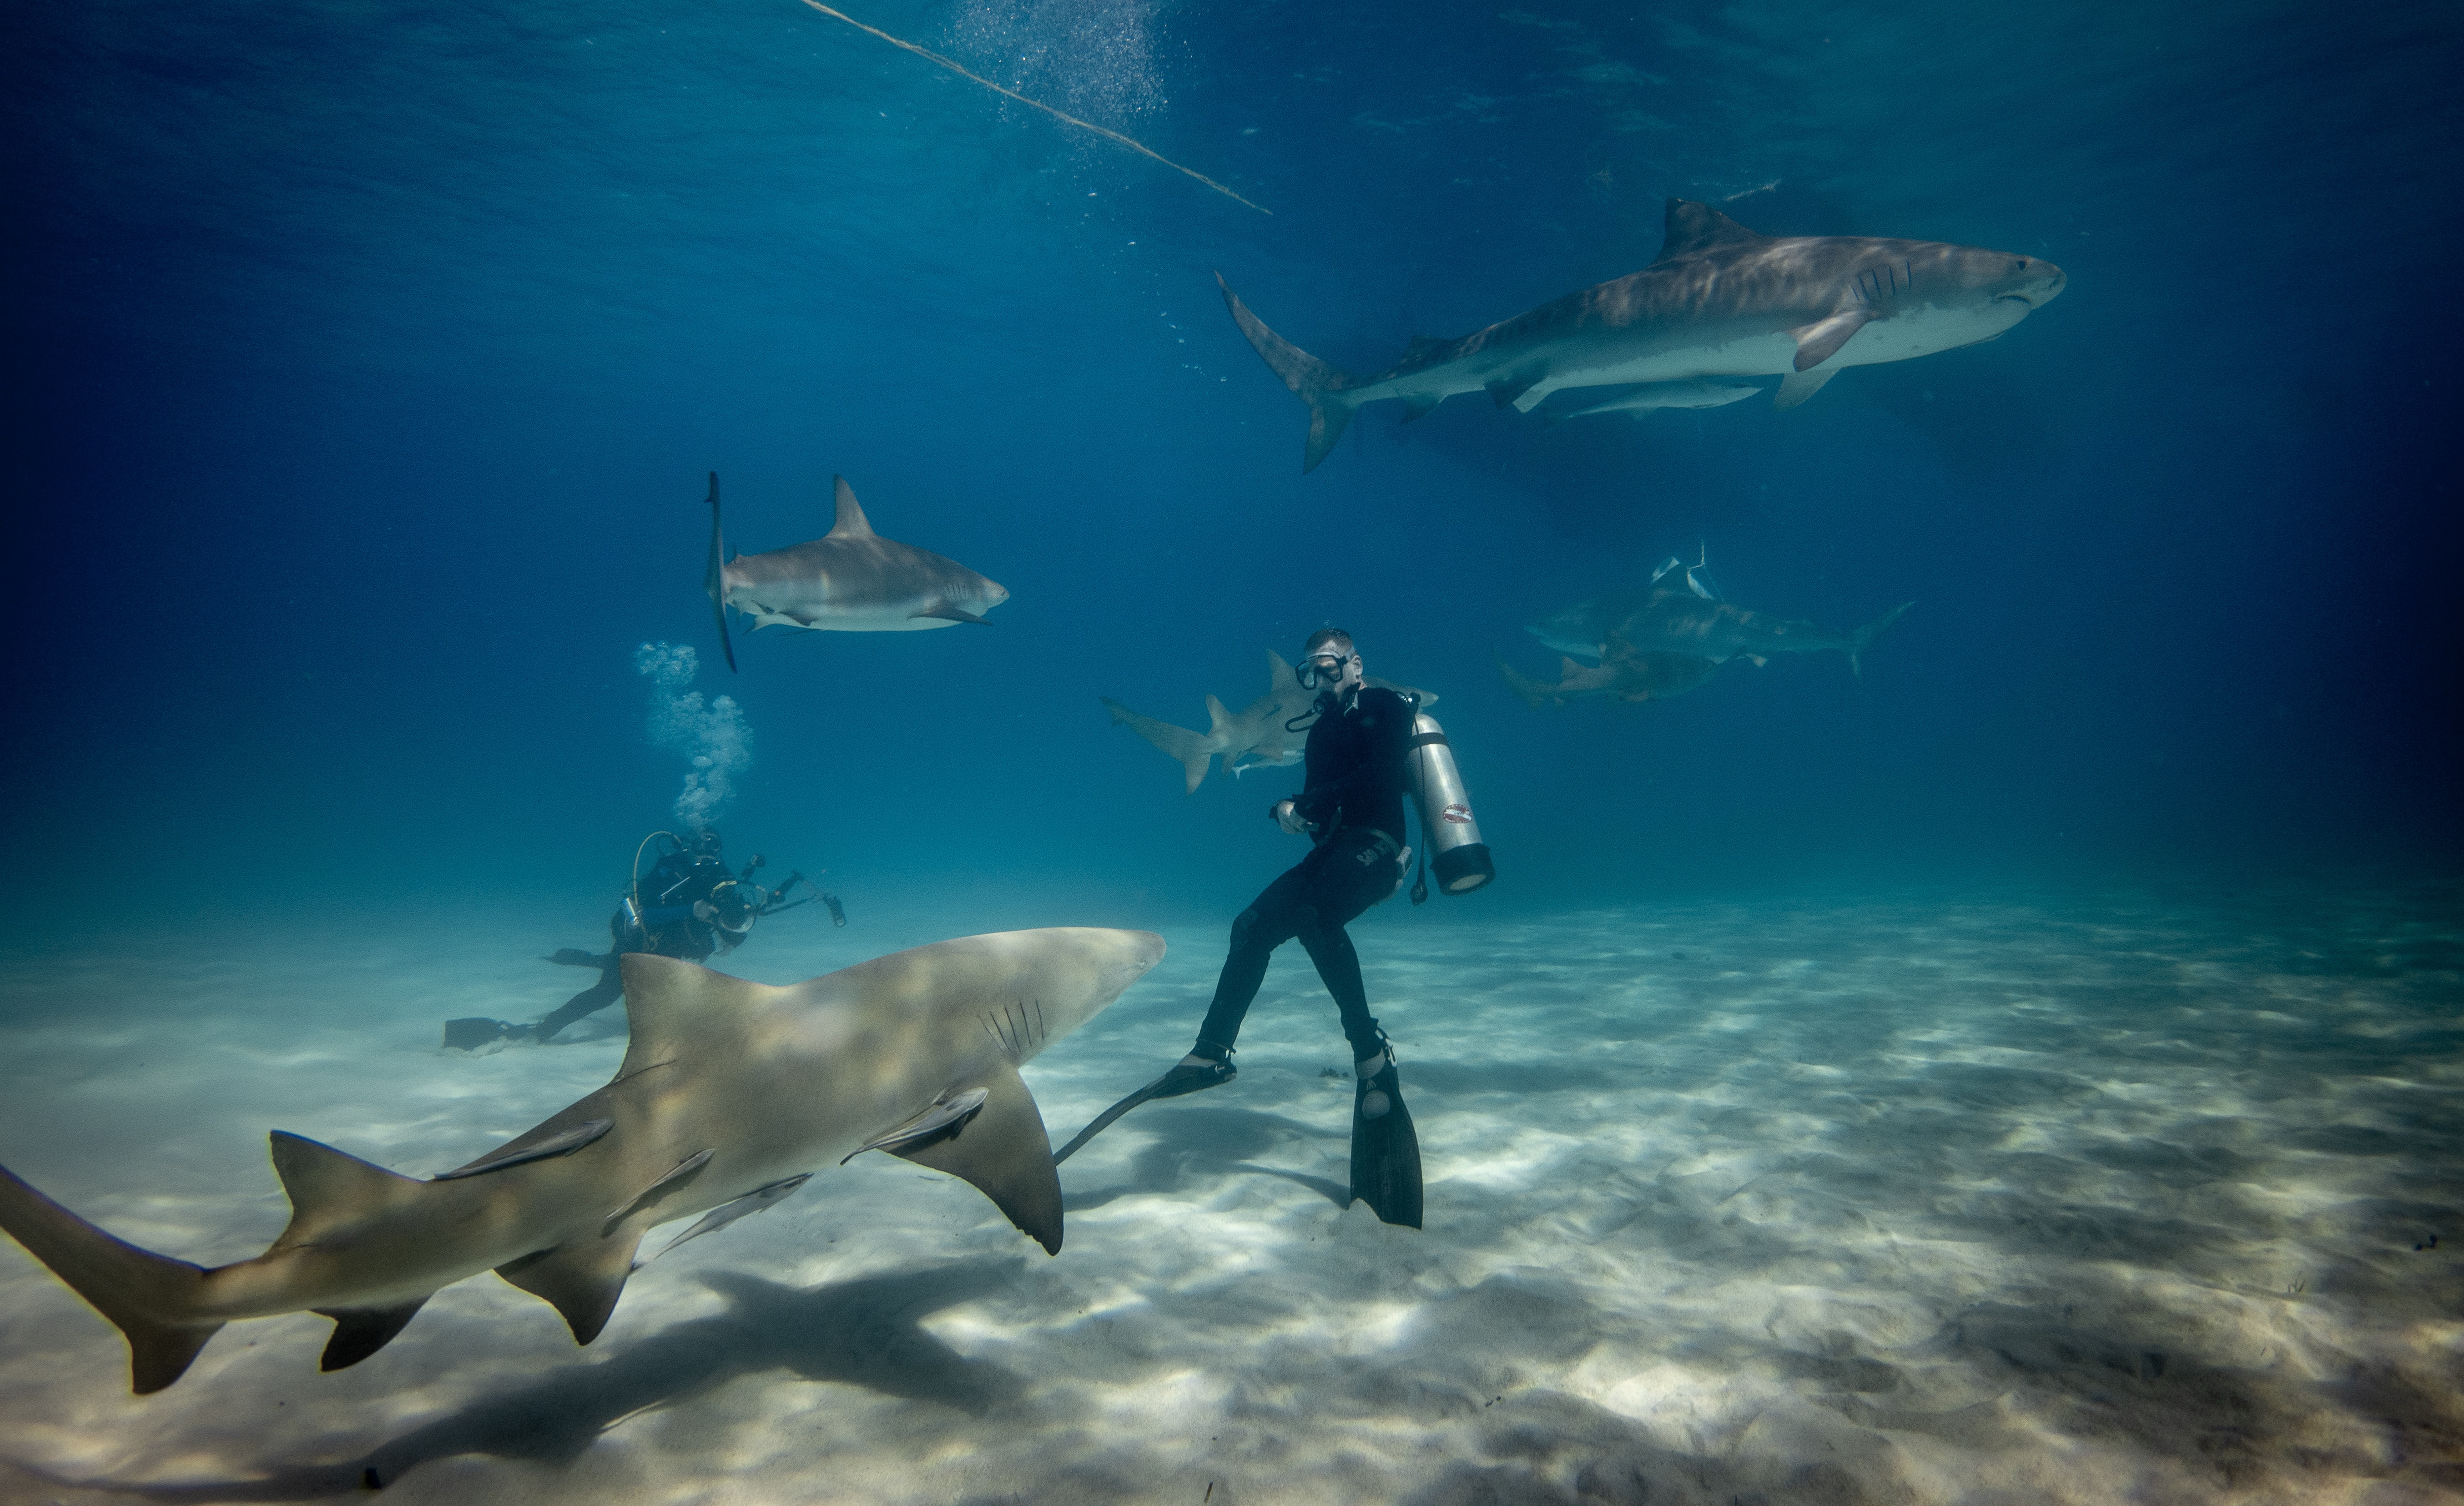 Scuba driving underwater with sharks